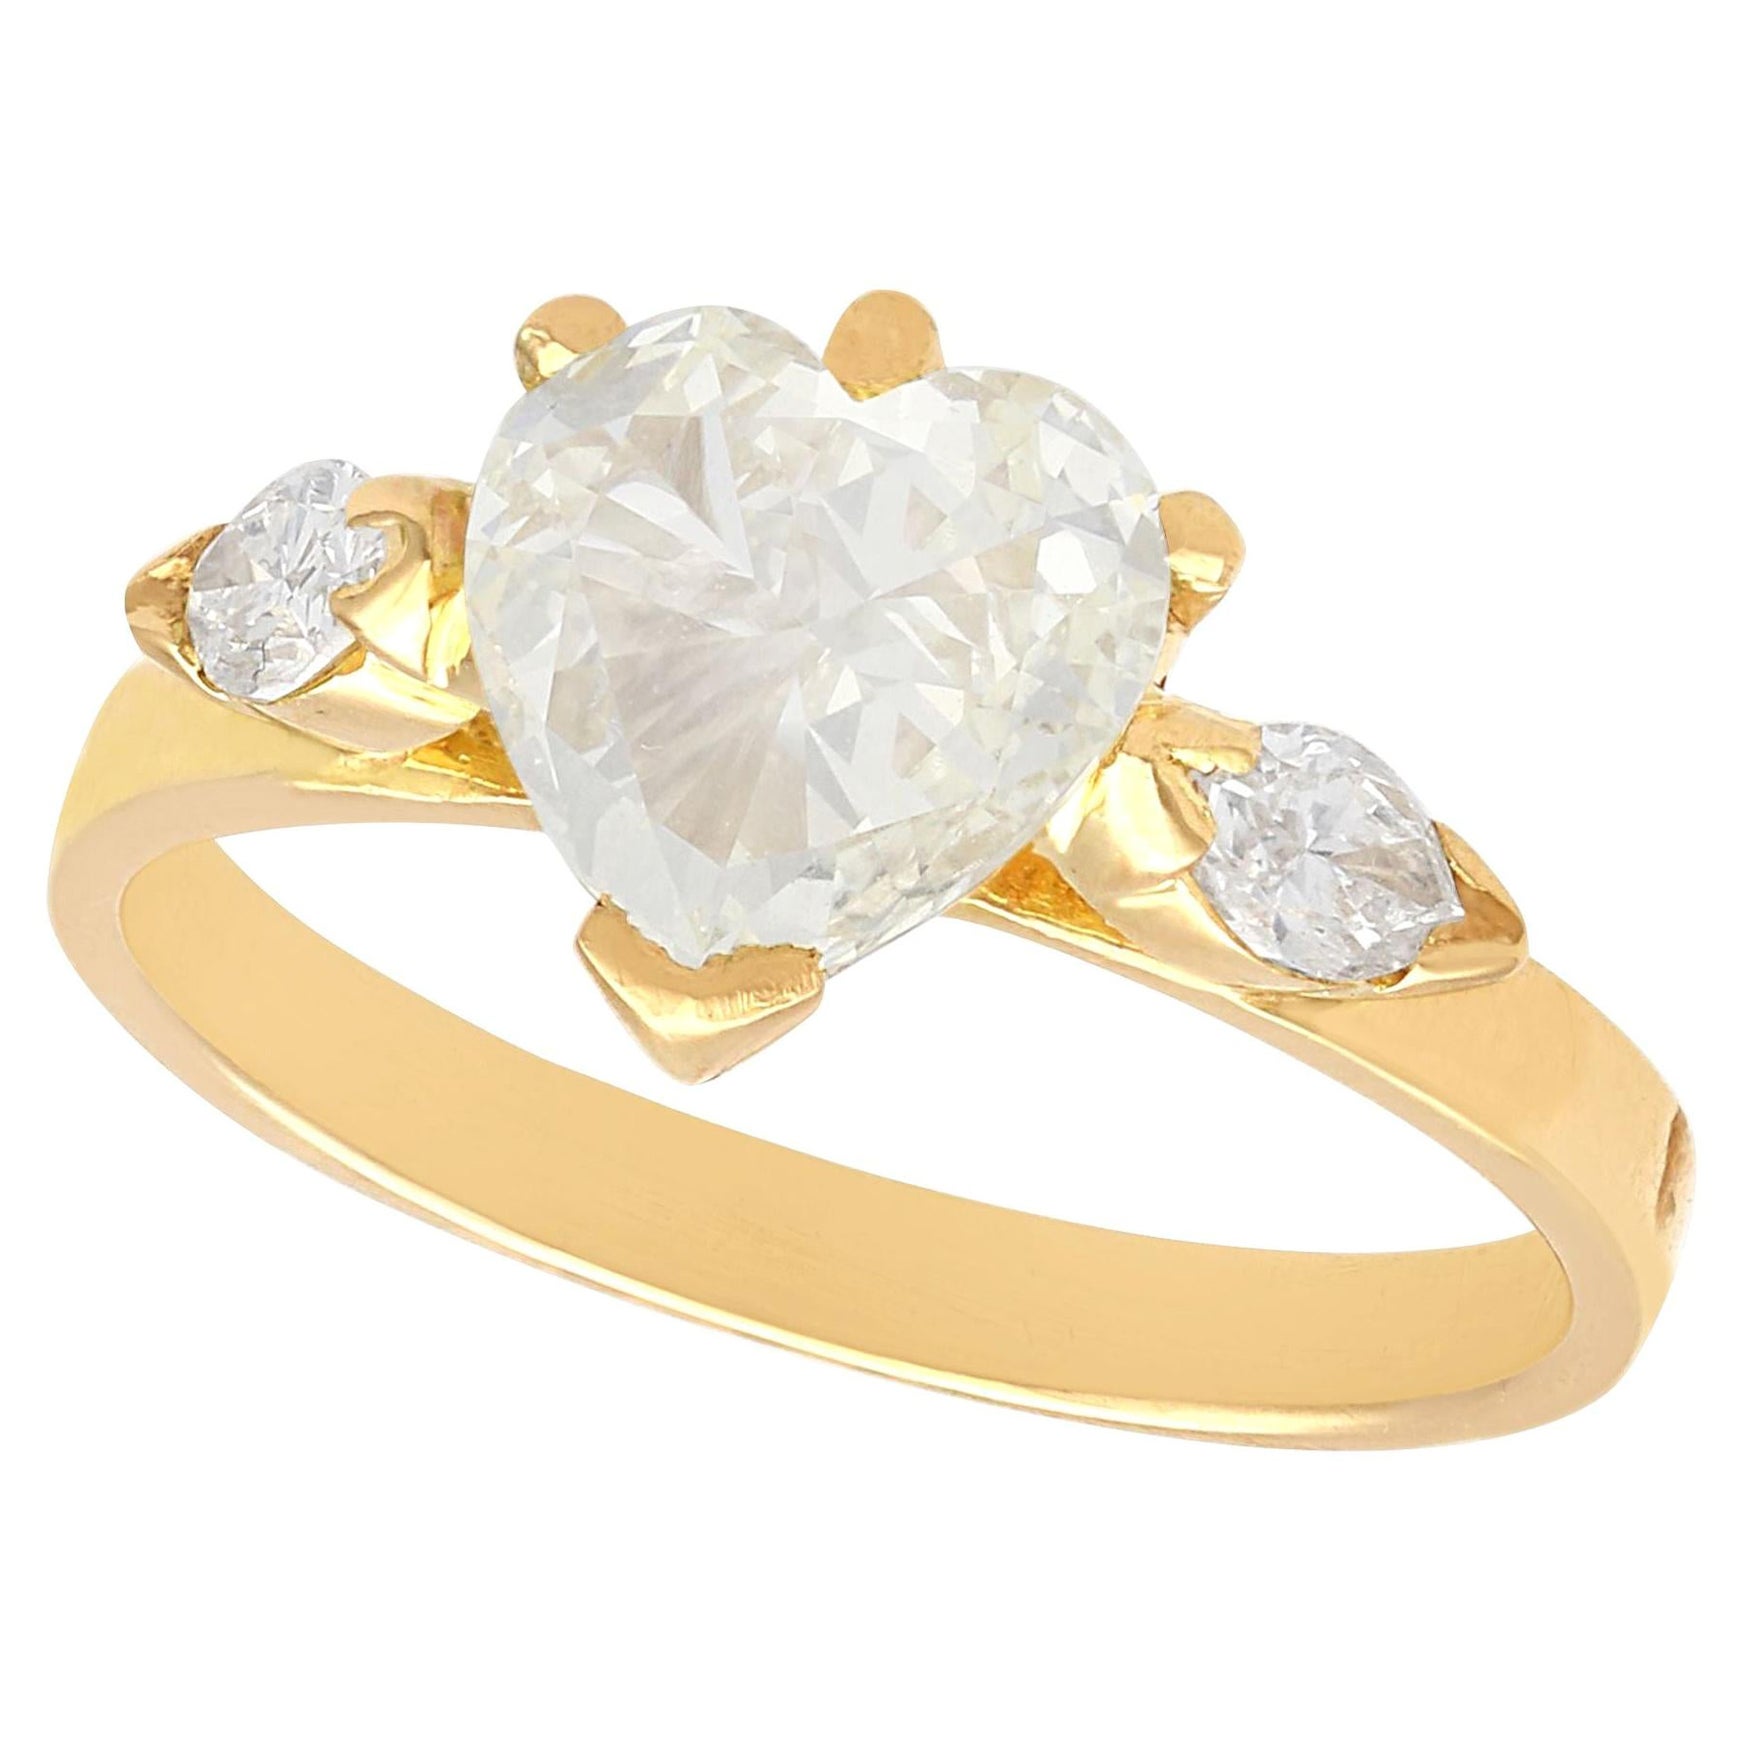 Vintage French 1.32 Carat Diamond and Yellow Gold Engagement Ring